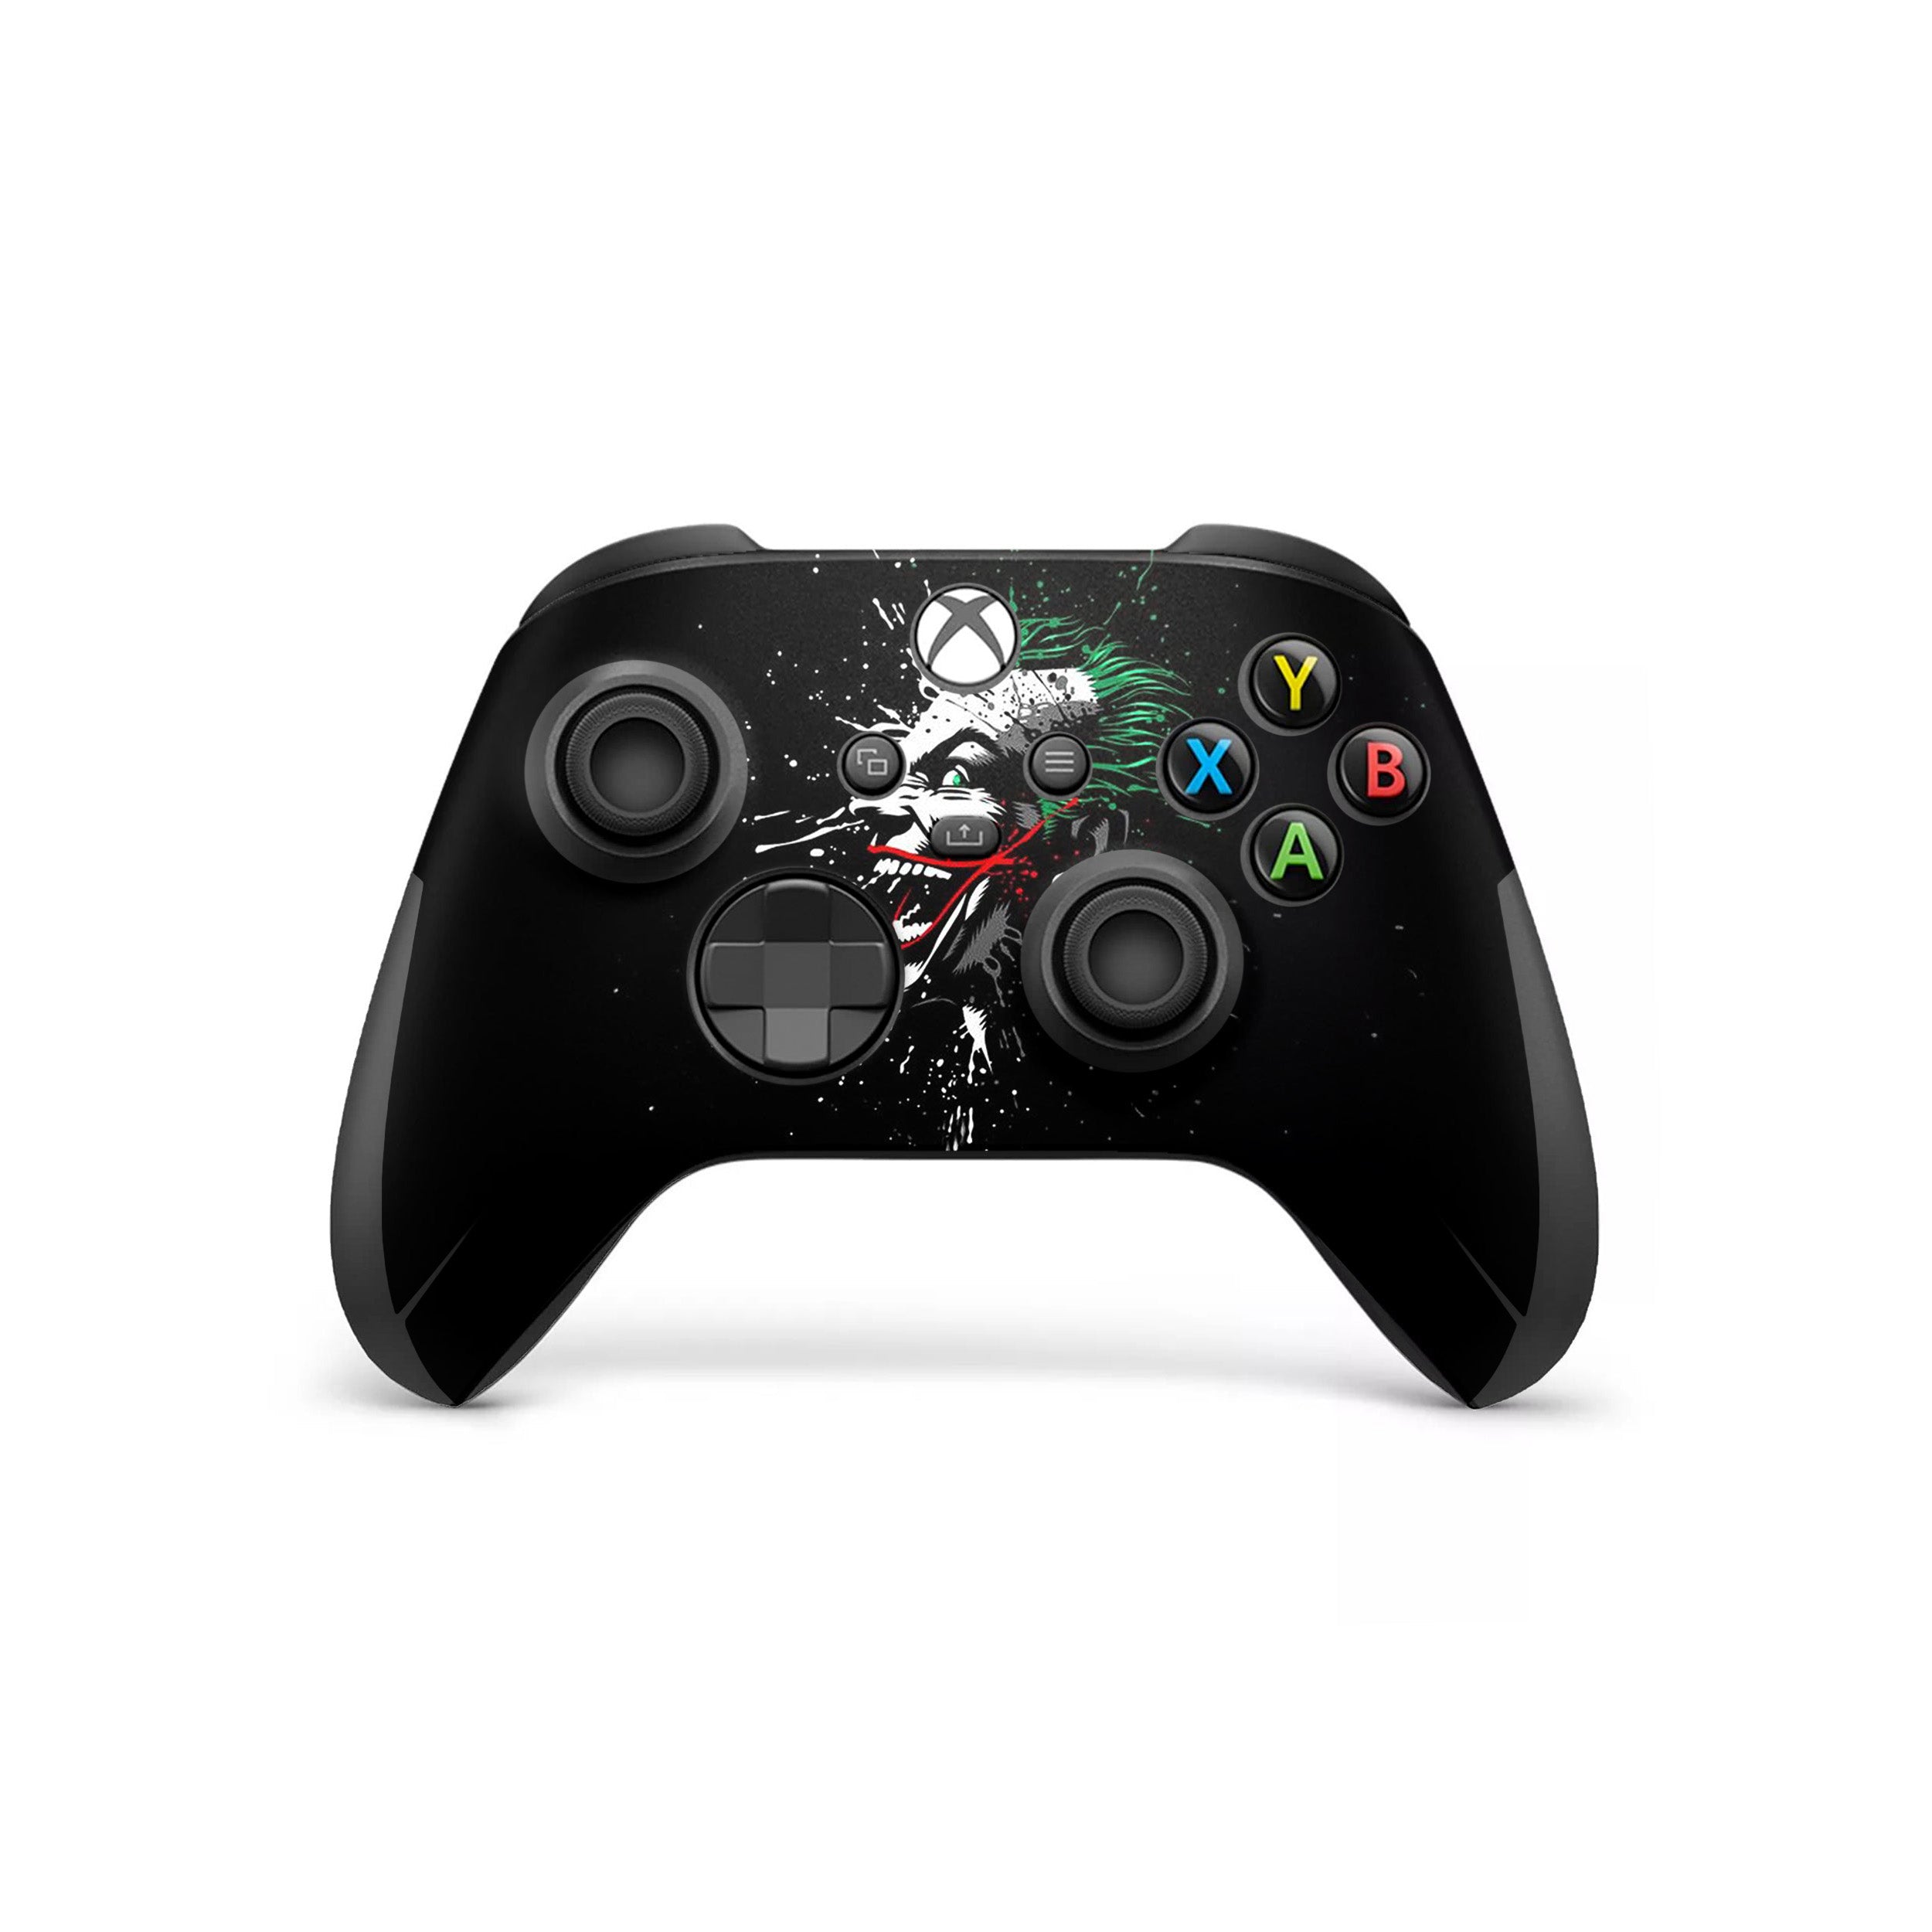 A video game skin featuring a DC Comics Joker design for the Xbox Wireless Controller.